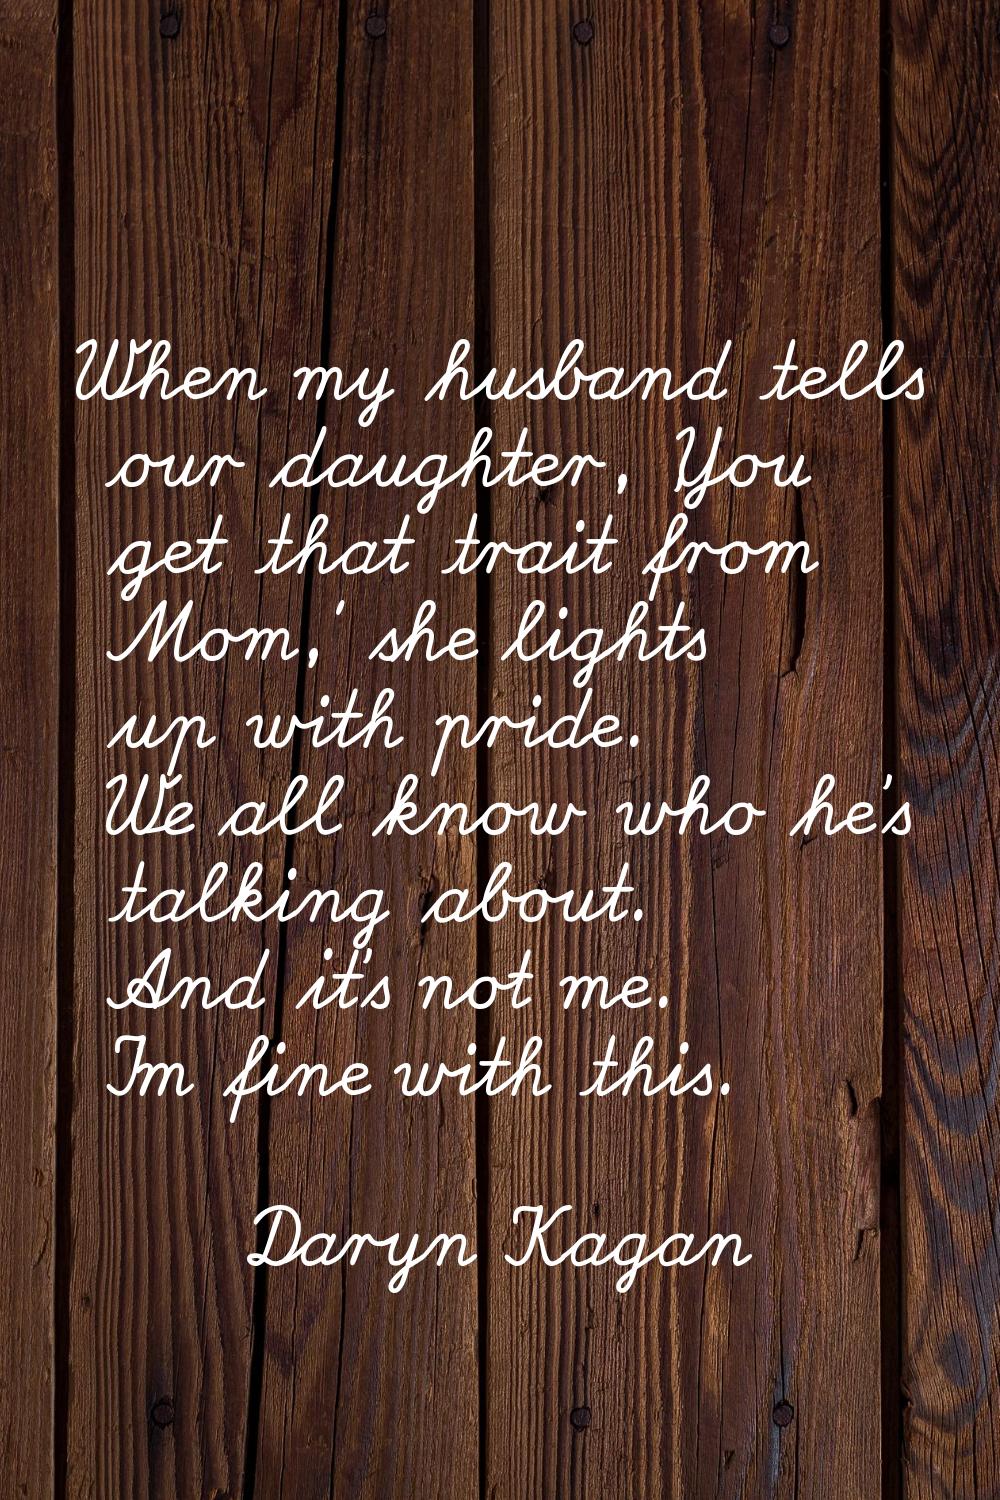 When my husband tells our daughter, 'You get that trait from Mom,' she lights up with pride. We all